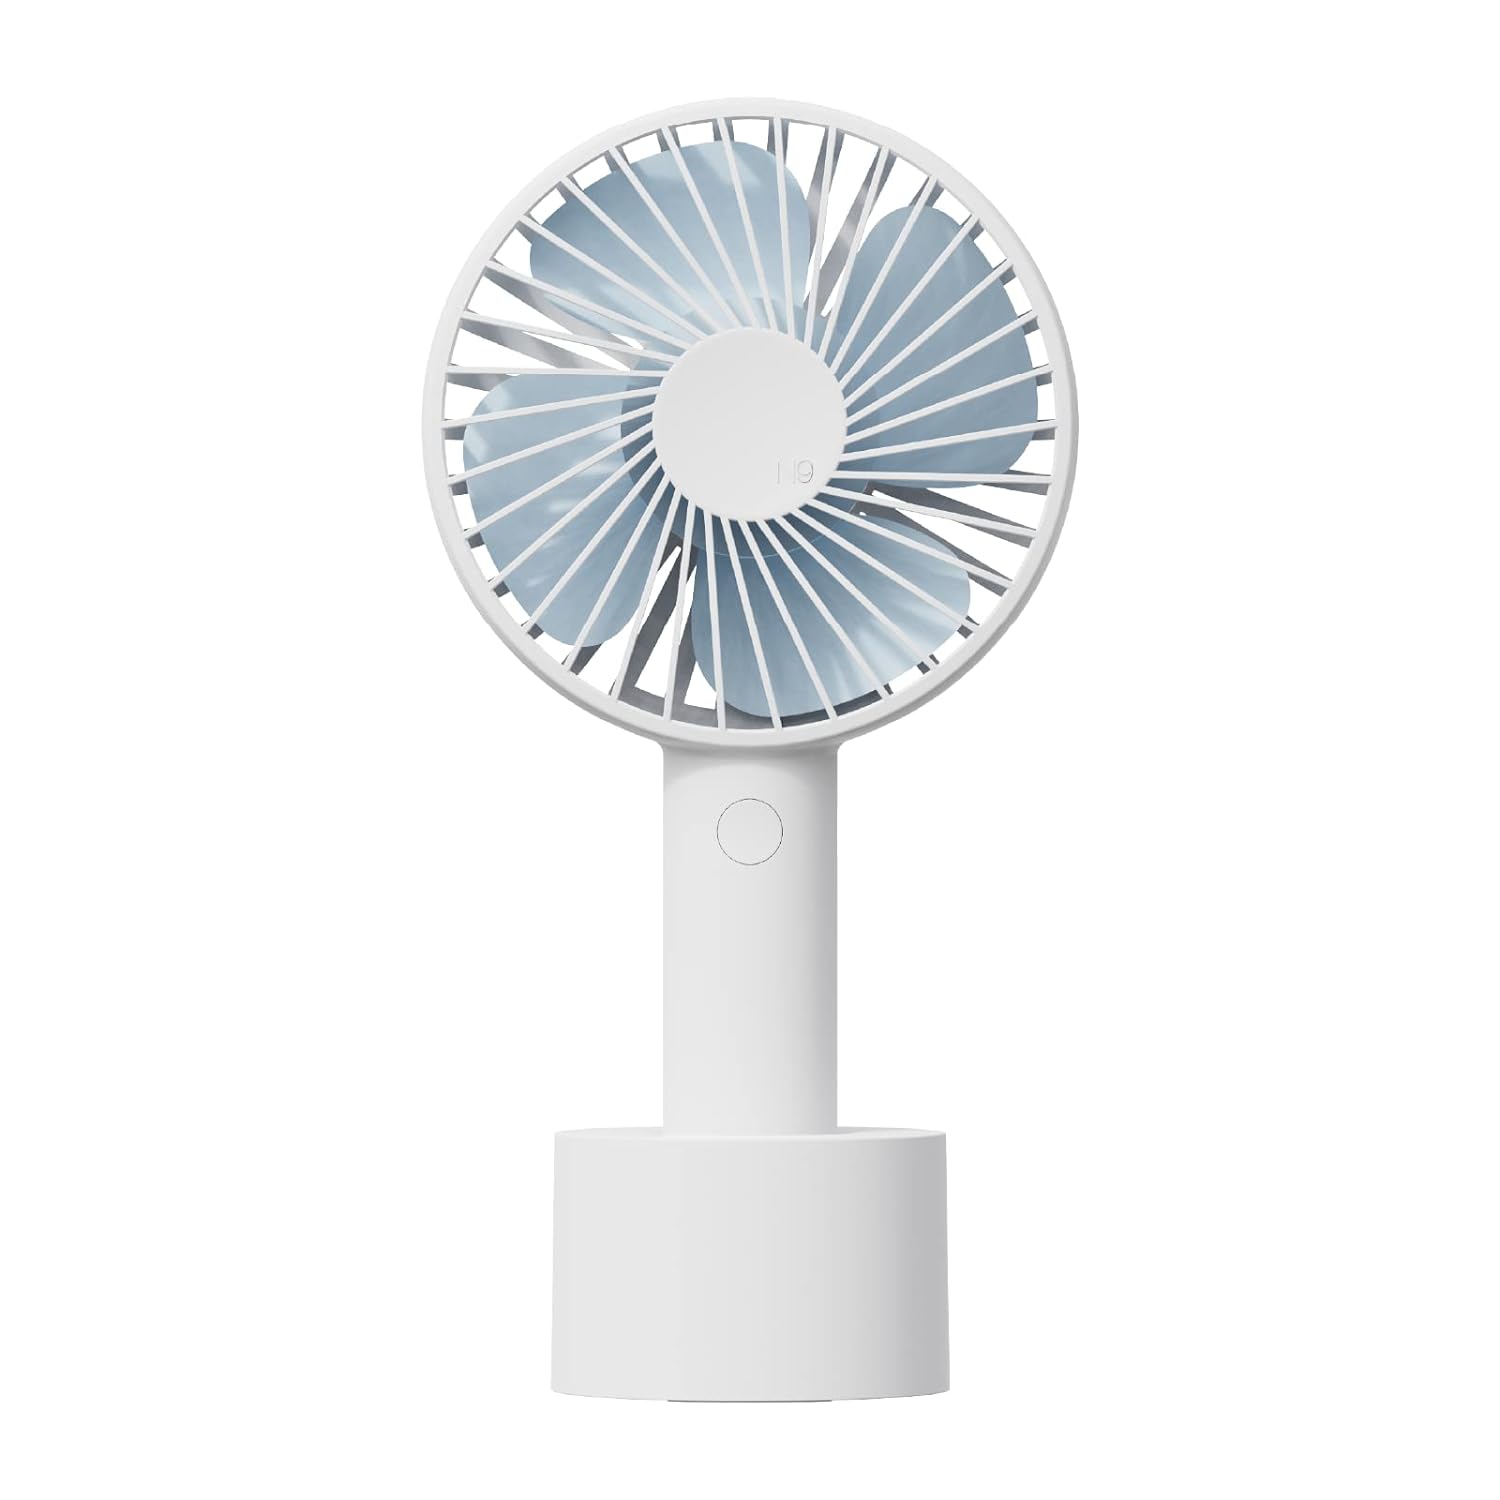 AISOLOVE Handheld Fan, Portable Fan with Fan Stand, USB Rechargeable Personal Fan with 3 Speed for Travel, Outdoor, Indoor, Commute, Office-White